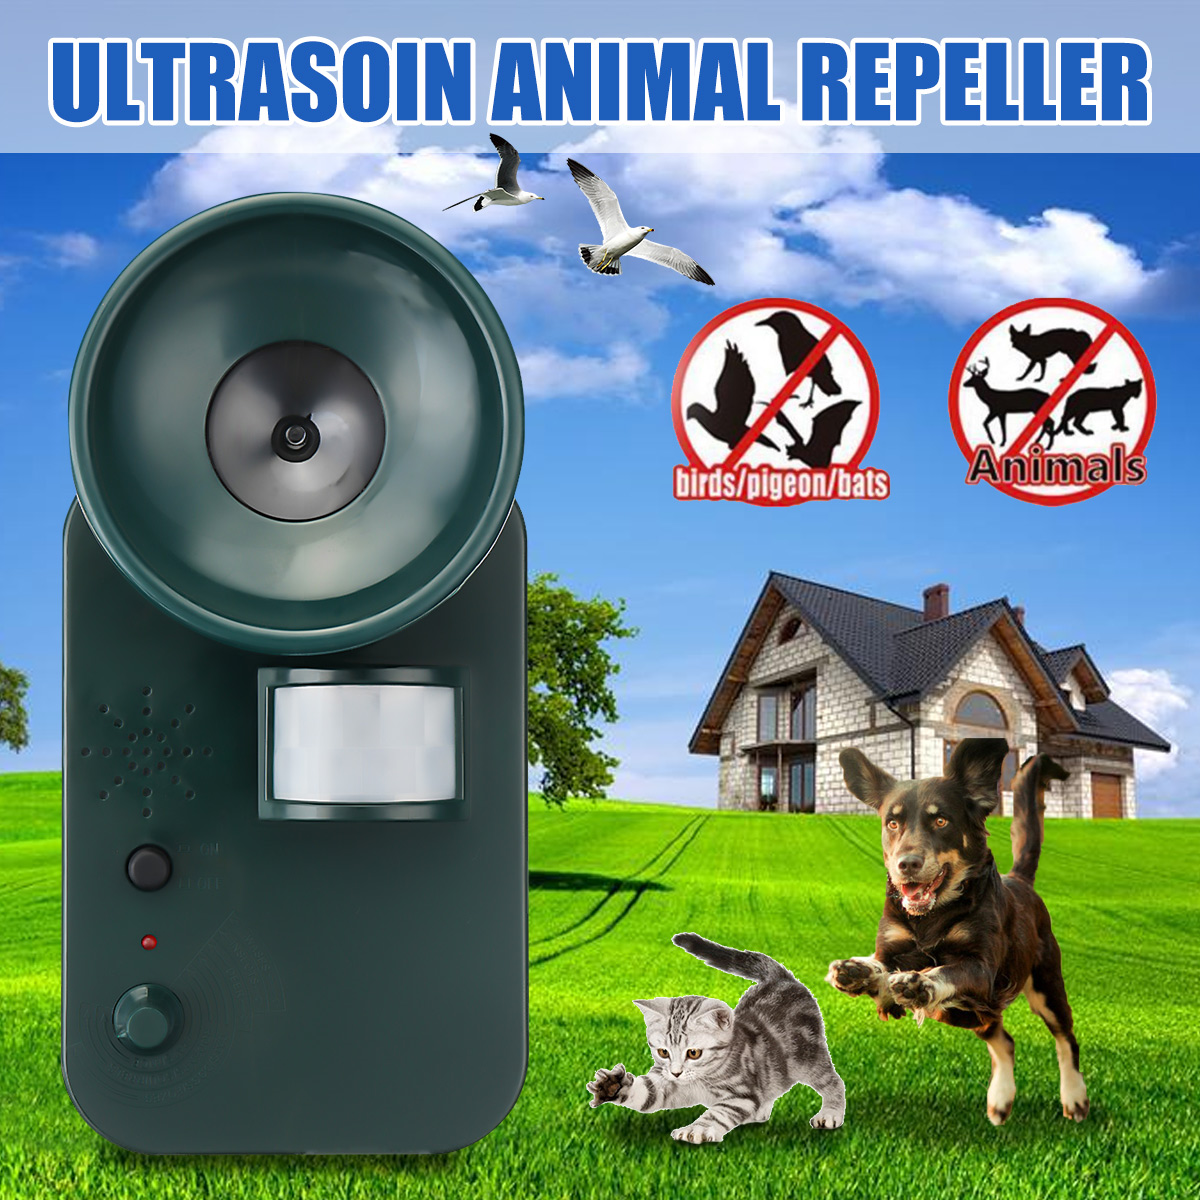 5000sqft-9V-DC-Ultra-sonic-Cordless-Pest-Animal-Repeller-Outdoor-Safely-Repel-Various-Animal-1304035-1